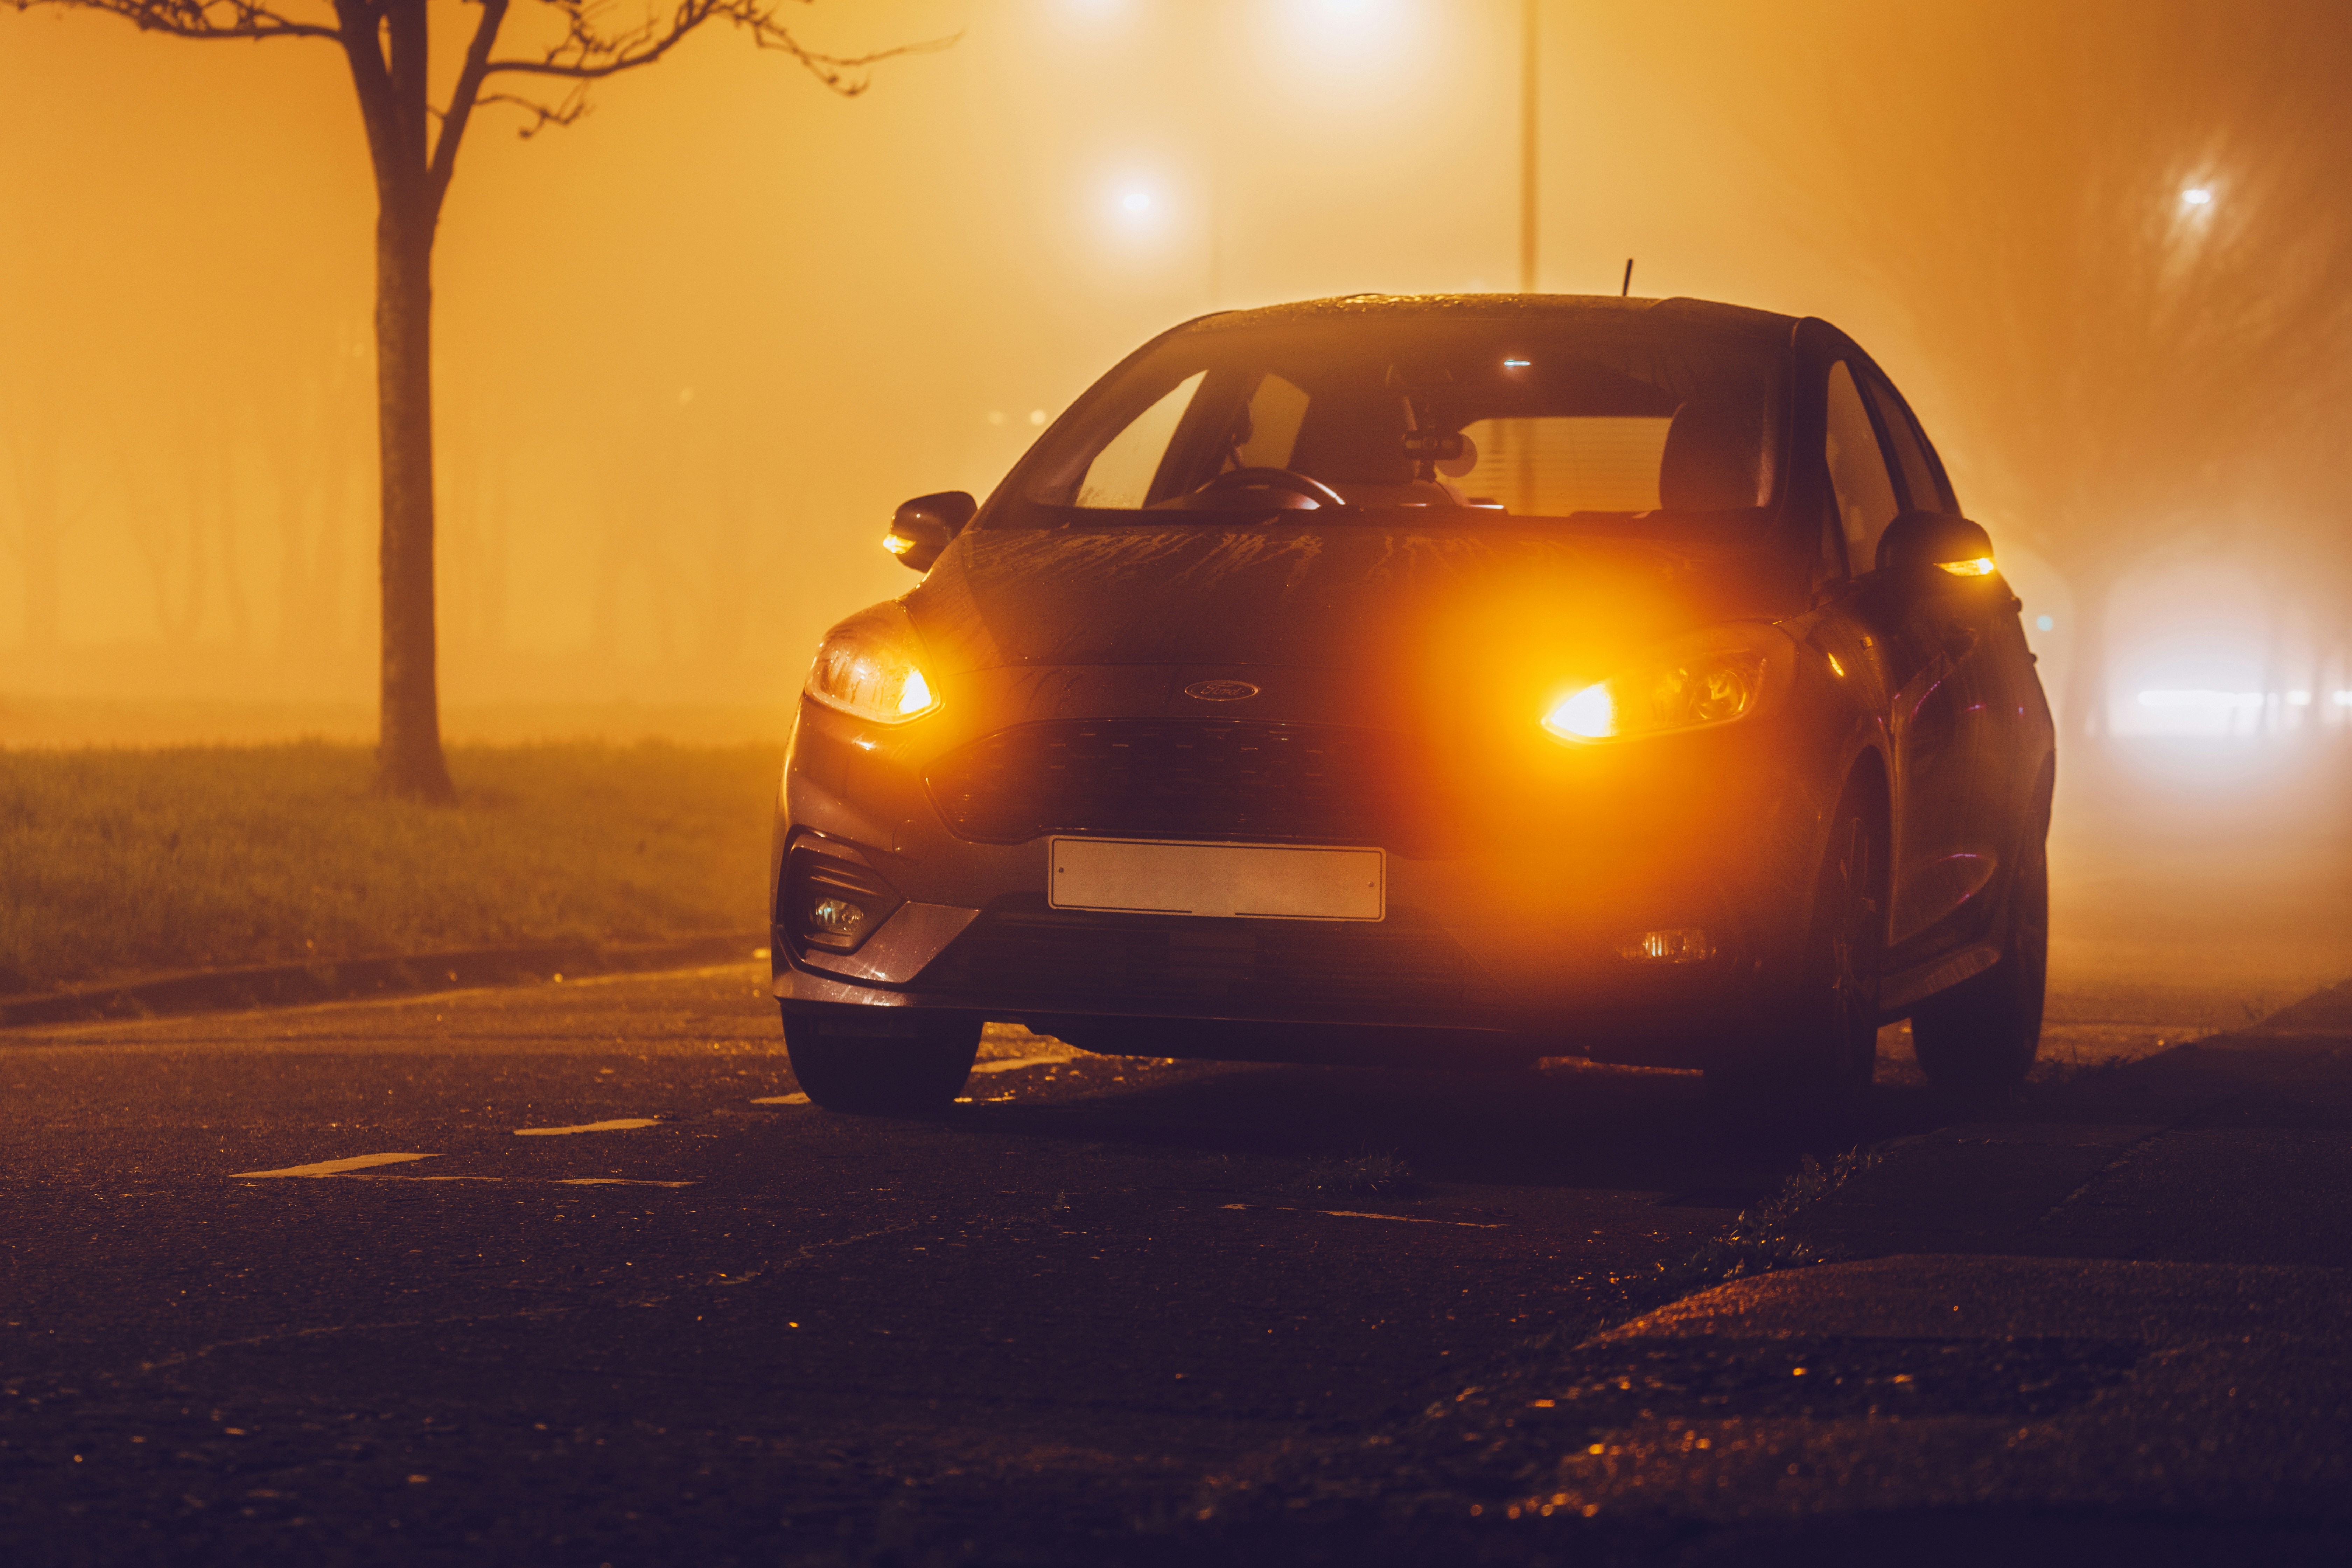 I had a new car delivered last week and I took the opportunity to experiment with long exposure to get a few moody shots of it during heavy fog. This photo was an accident as I leant on my key's which locked the car as the shutter was open for 1 second!